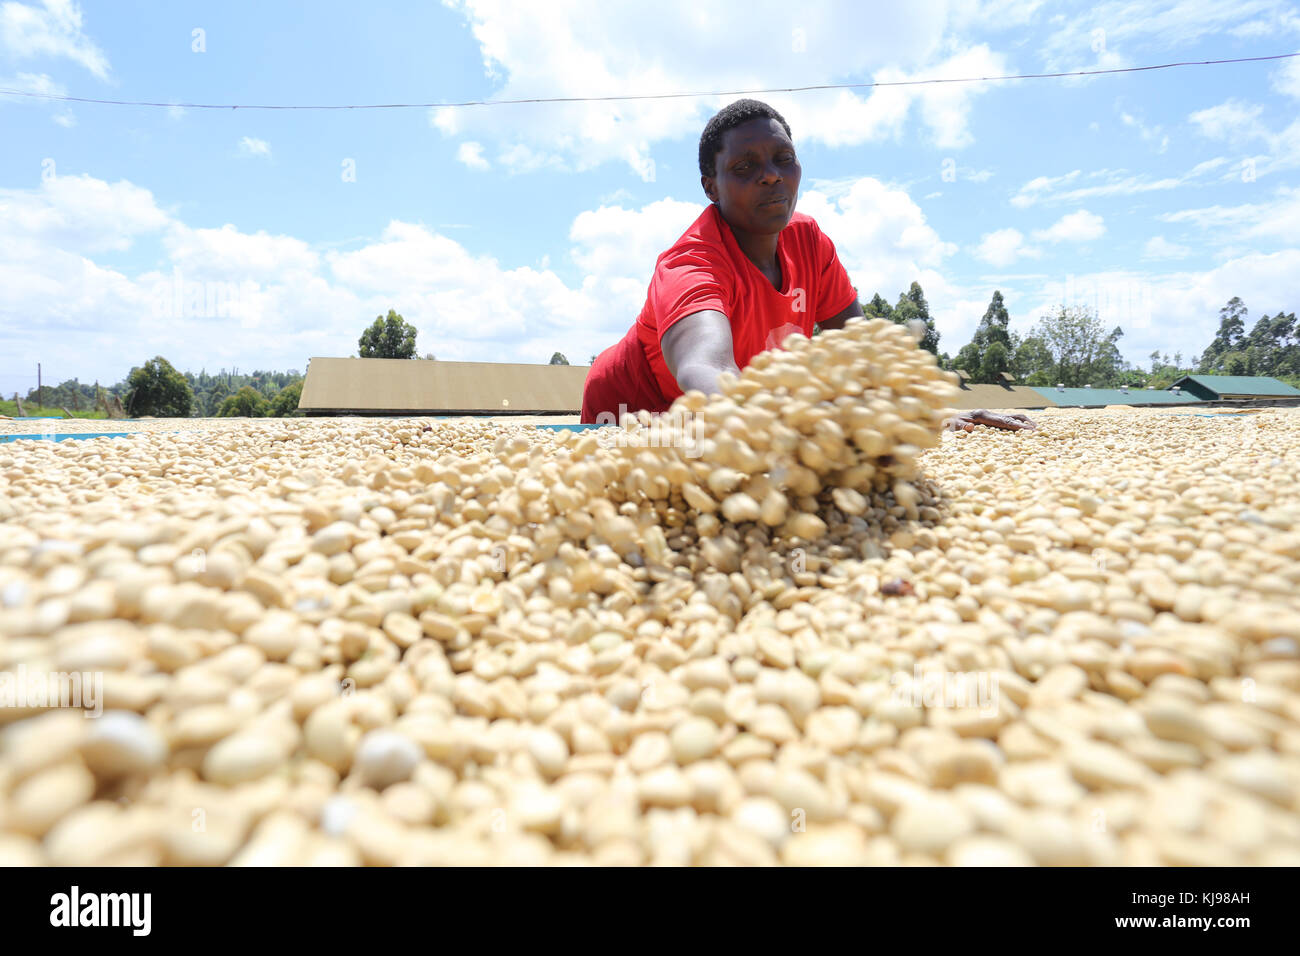 Kenya. 22nd Nov, 2017. Worker turning parchment coffee to dry at Gikanda Farmers Co-operative Society in Nyeri County, 125 Kilometers North of Kenya's capital Nairobi. Coffee harvesting season is at its peak and farmers are already picking ripe berries, which they deliver to the local factory. Coffee is the main source of income for most farmers earning an average 0.8 USD per kilogram of cherry. The farmers grow Arabica coffee, whose beans are widely sought in the world market among them consumers in Europe and USA. Picture taken on November 22, 2017, two days after the Supreme Court of Stock Photo